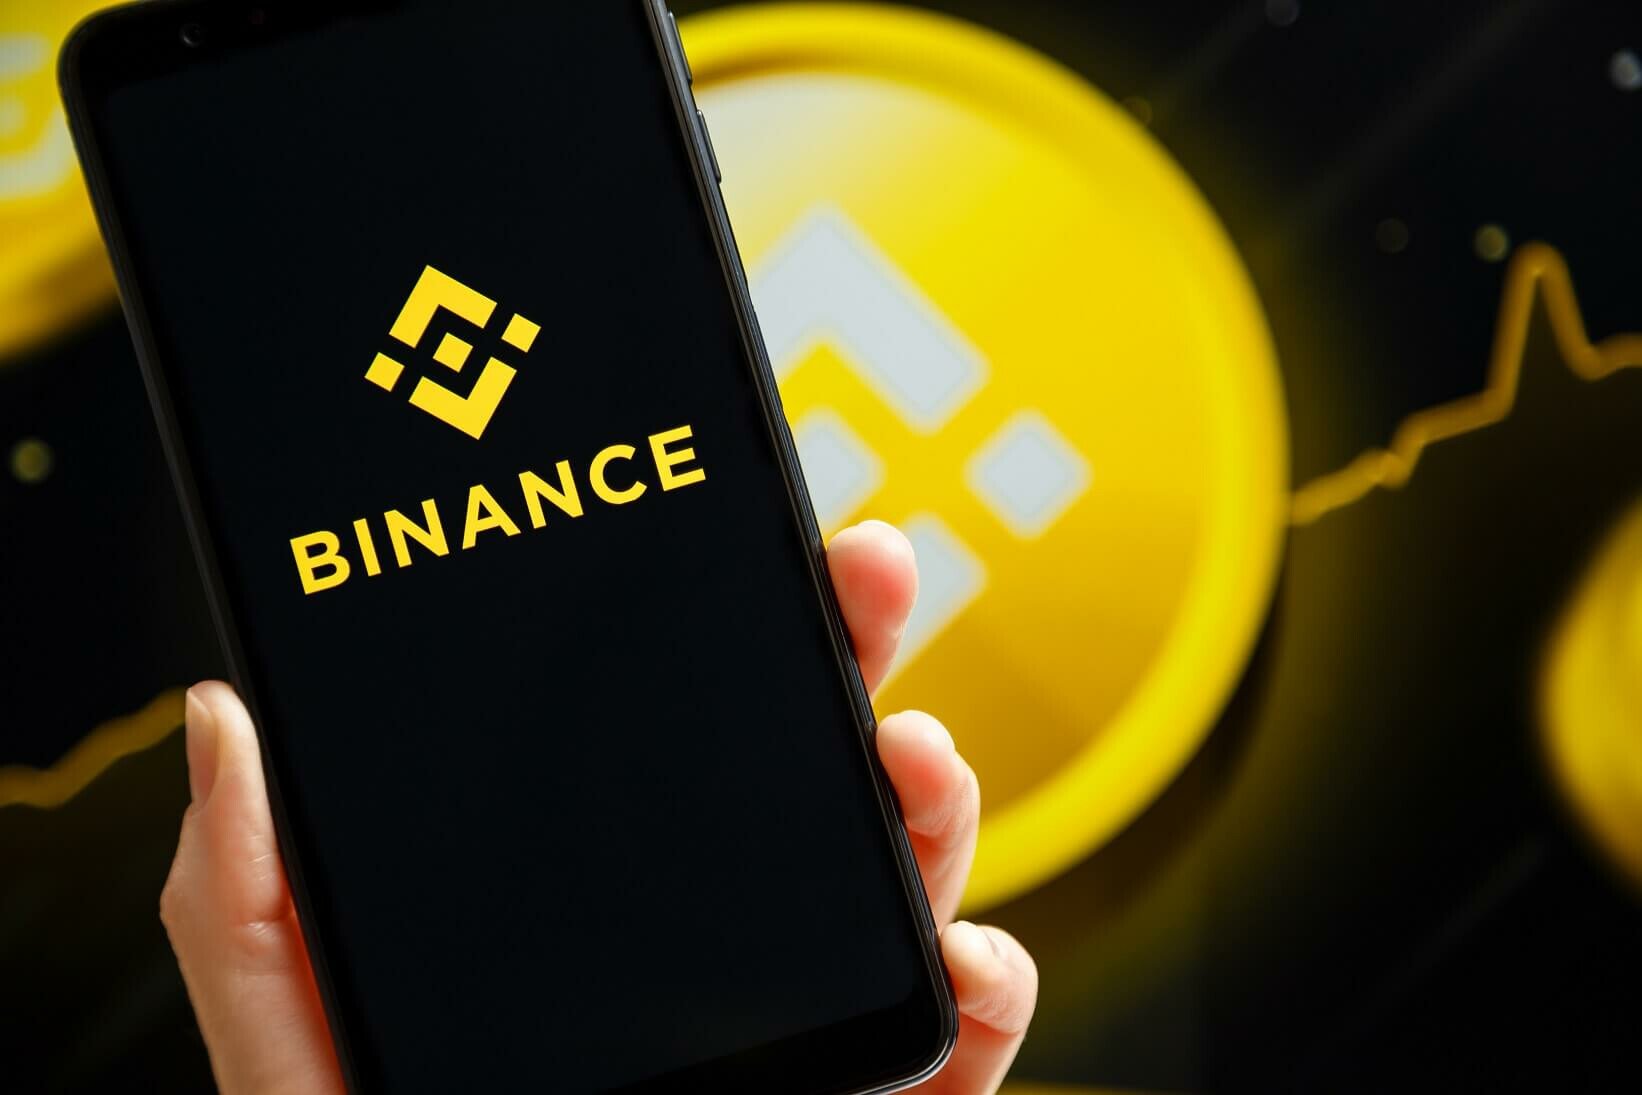 Binance Sees $700 Million in Ethereum Outflows Amid SEC Charges, Highest Since March Crypto Crisis